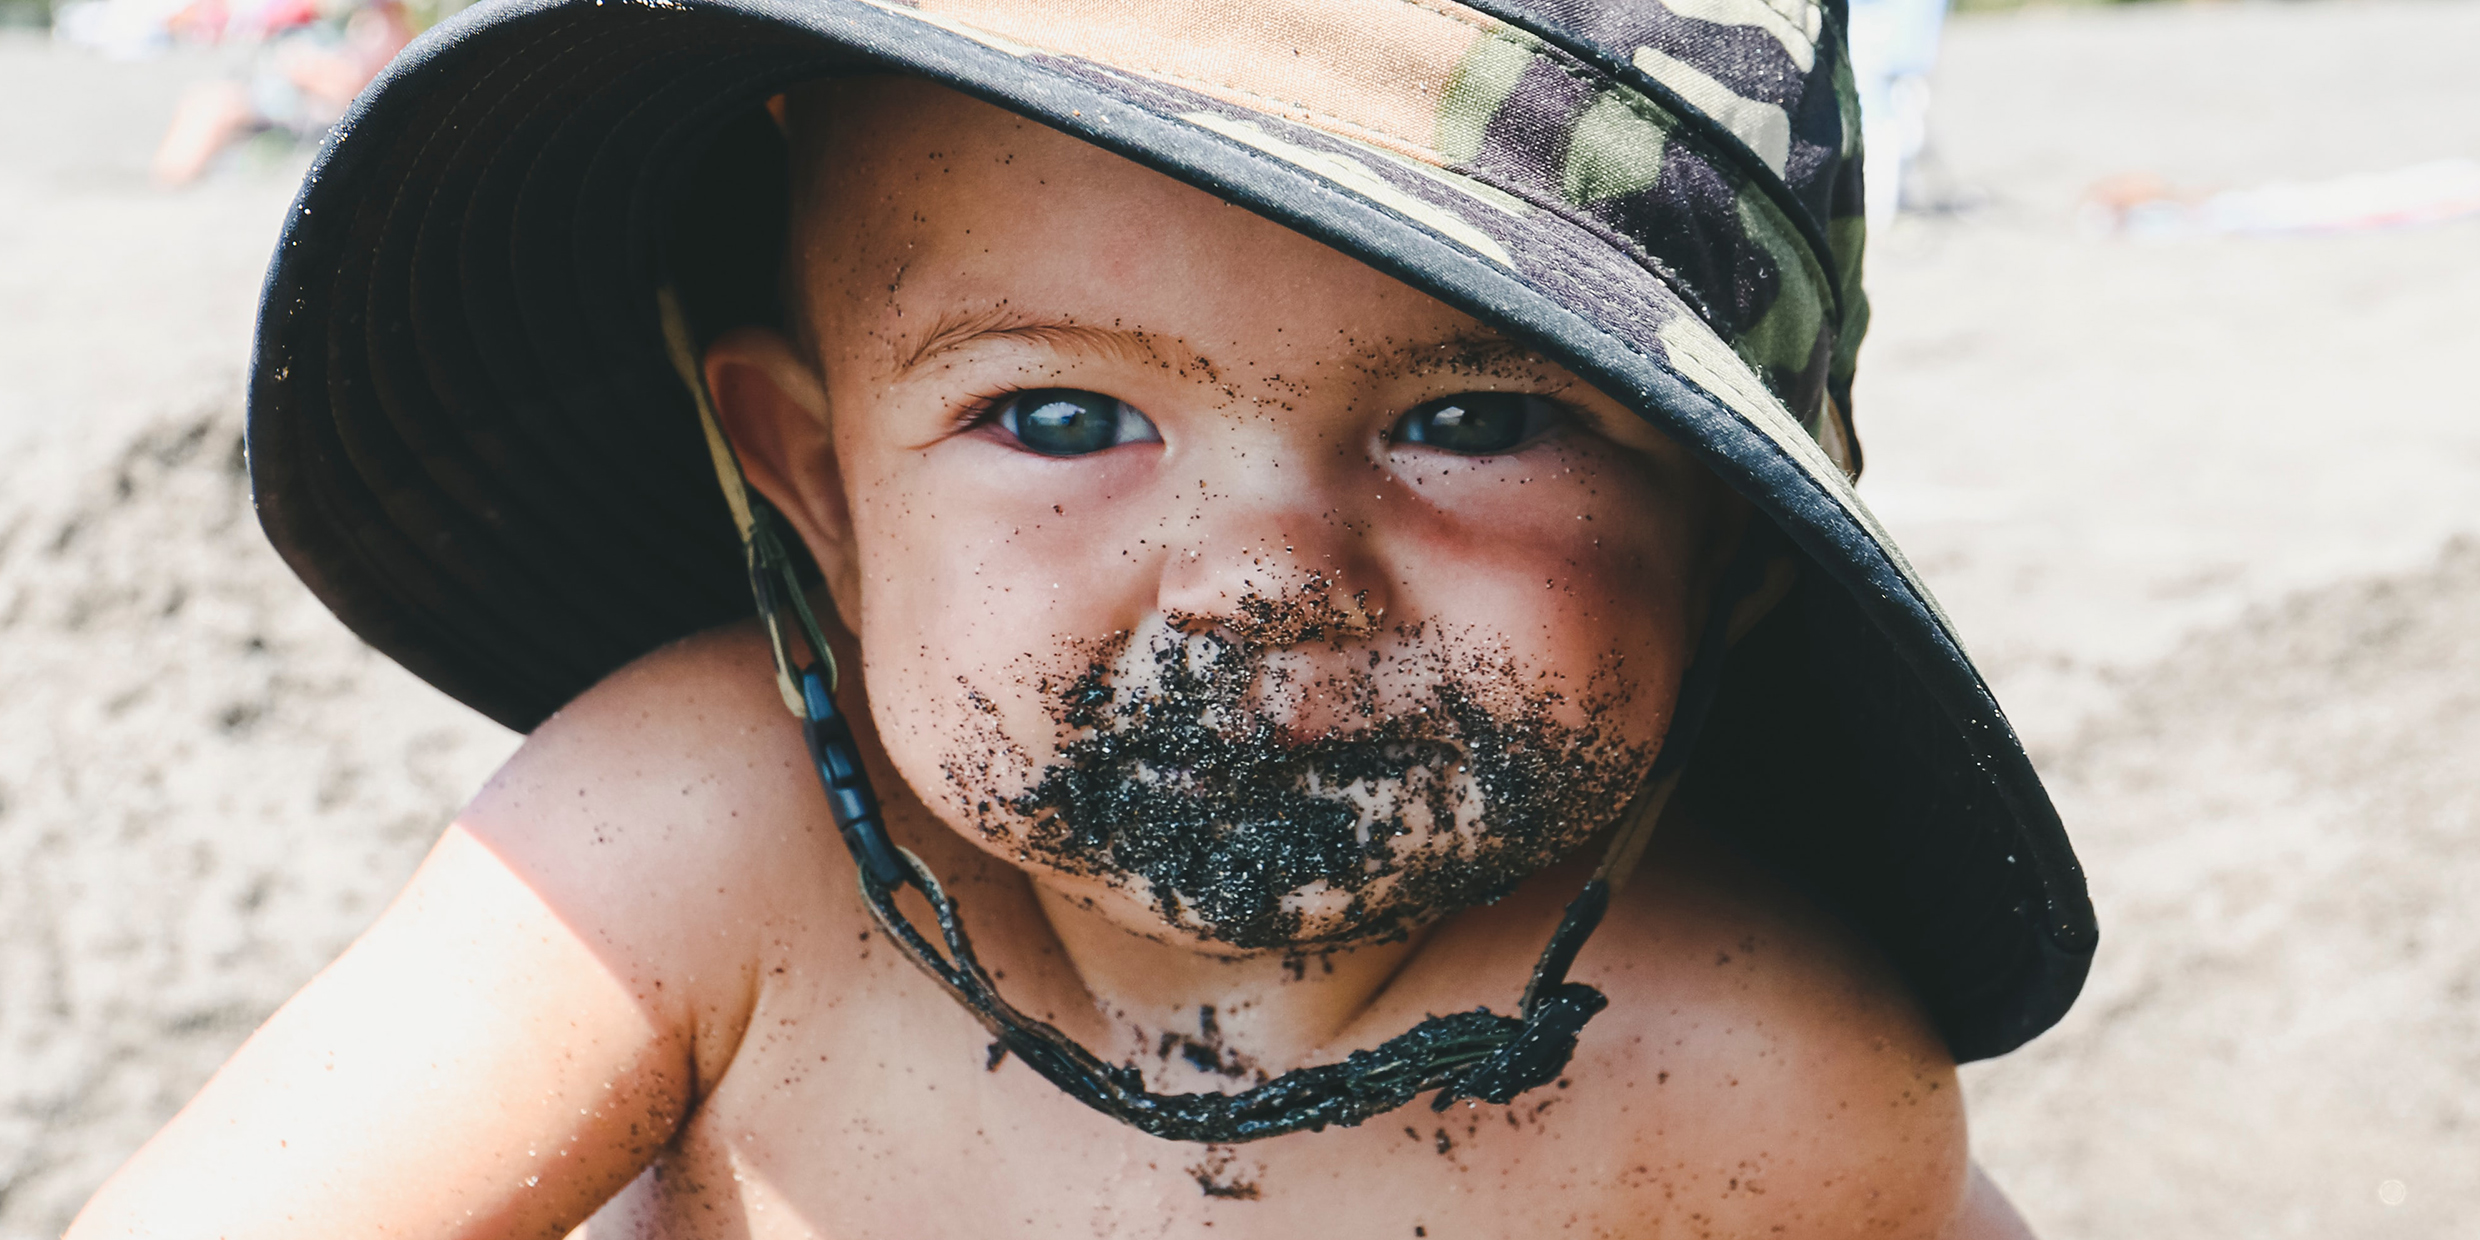 Image of infant with dirt all over face